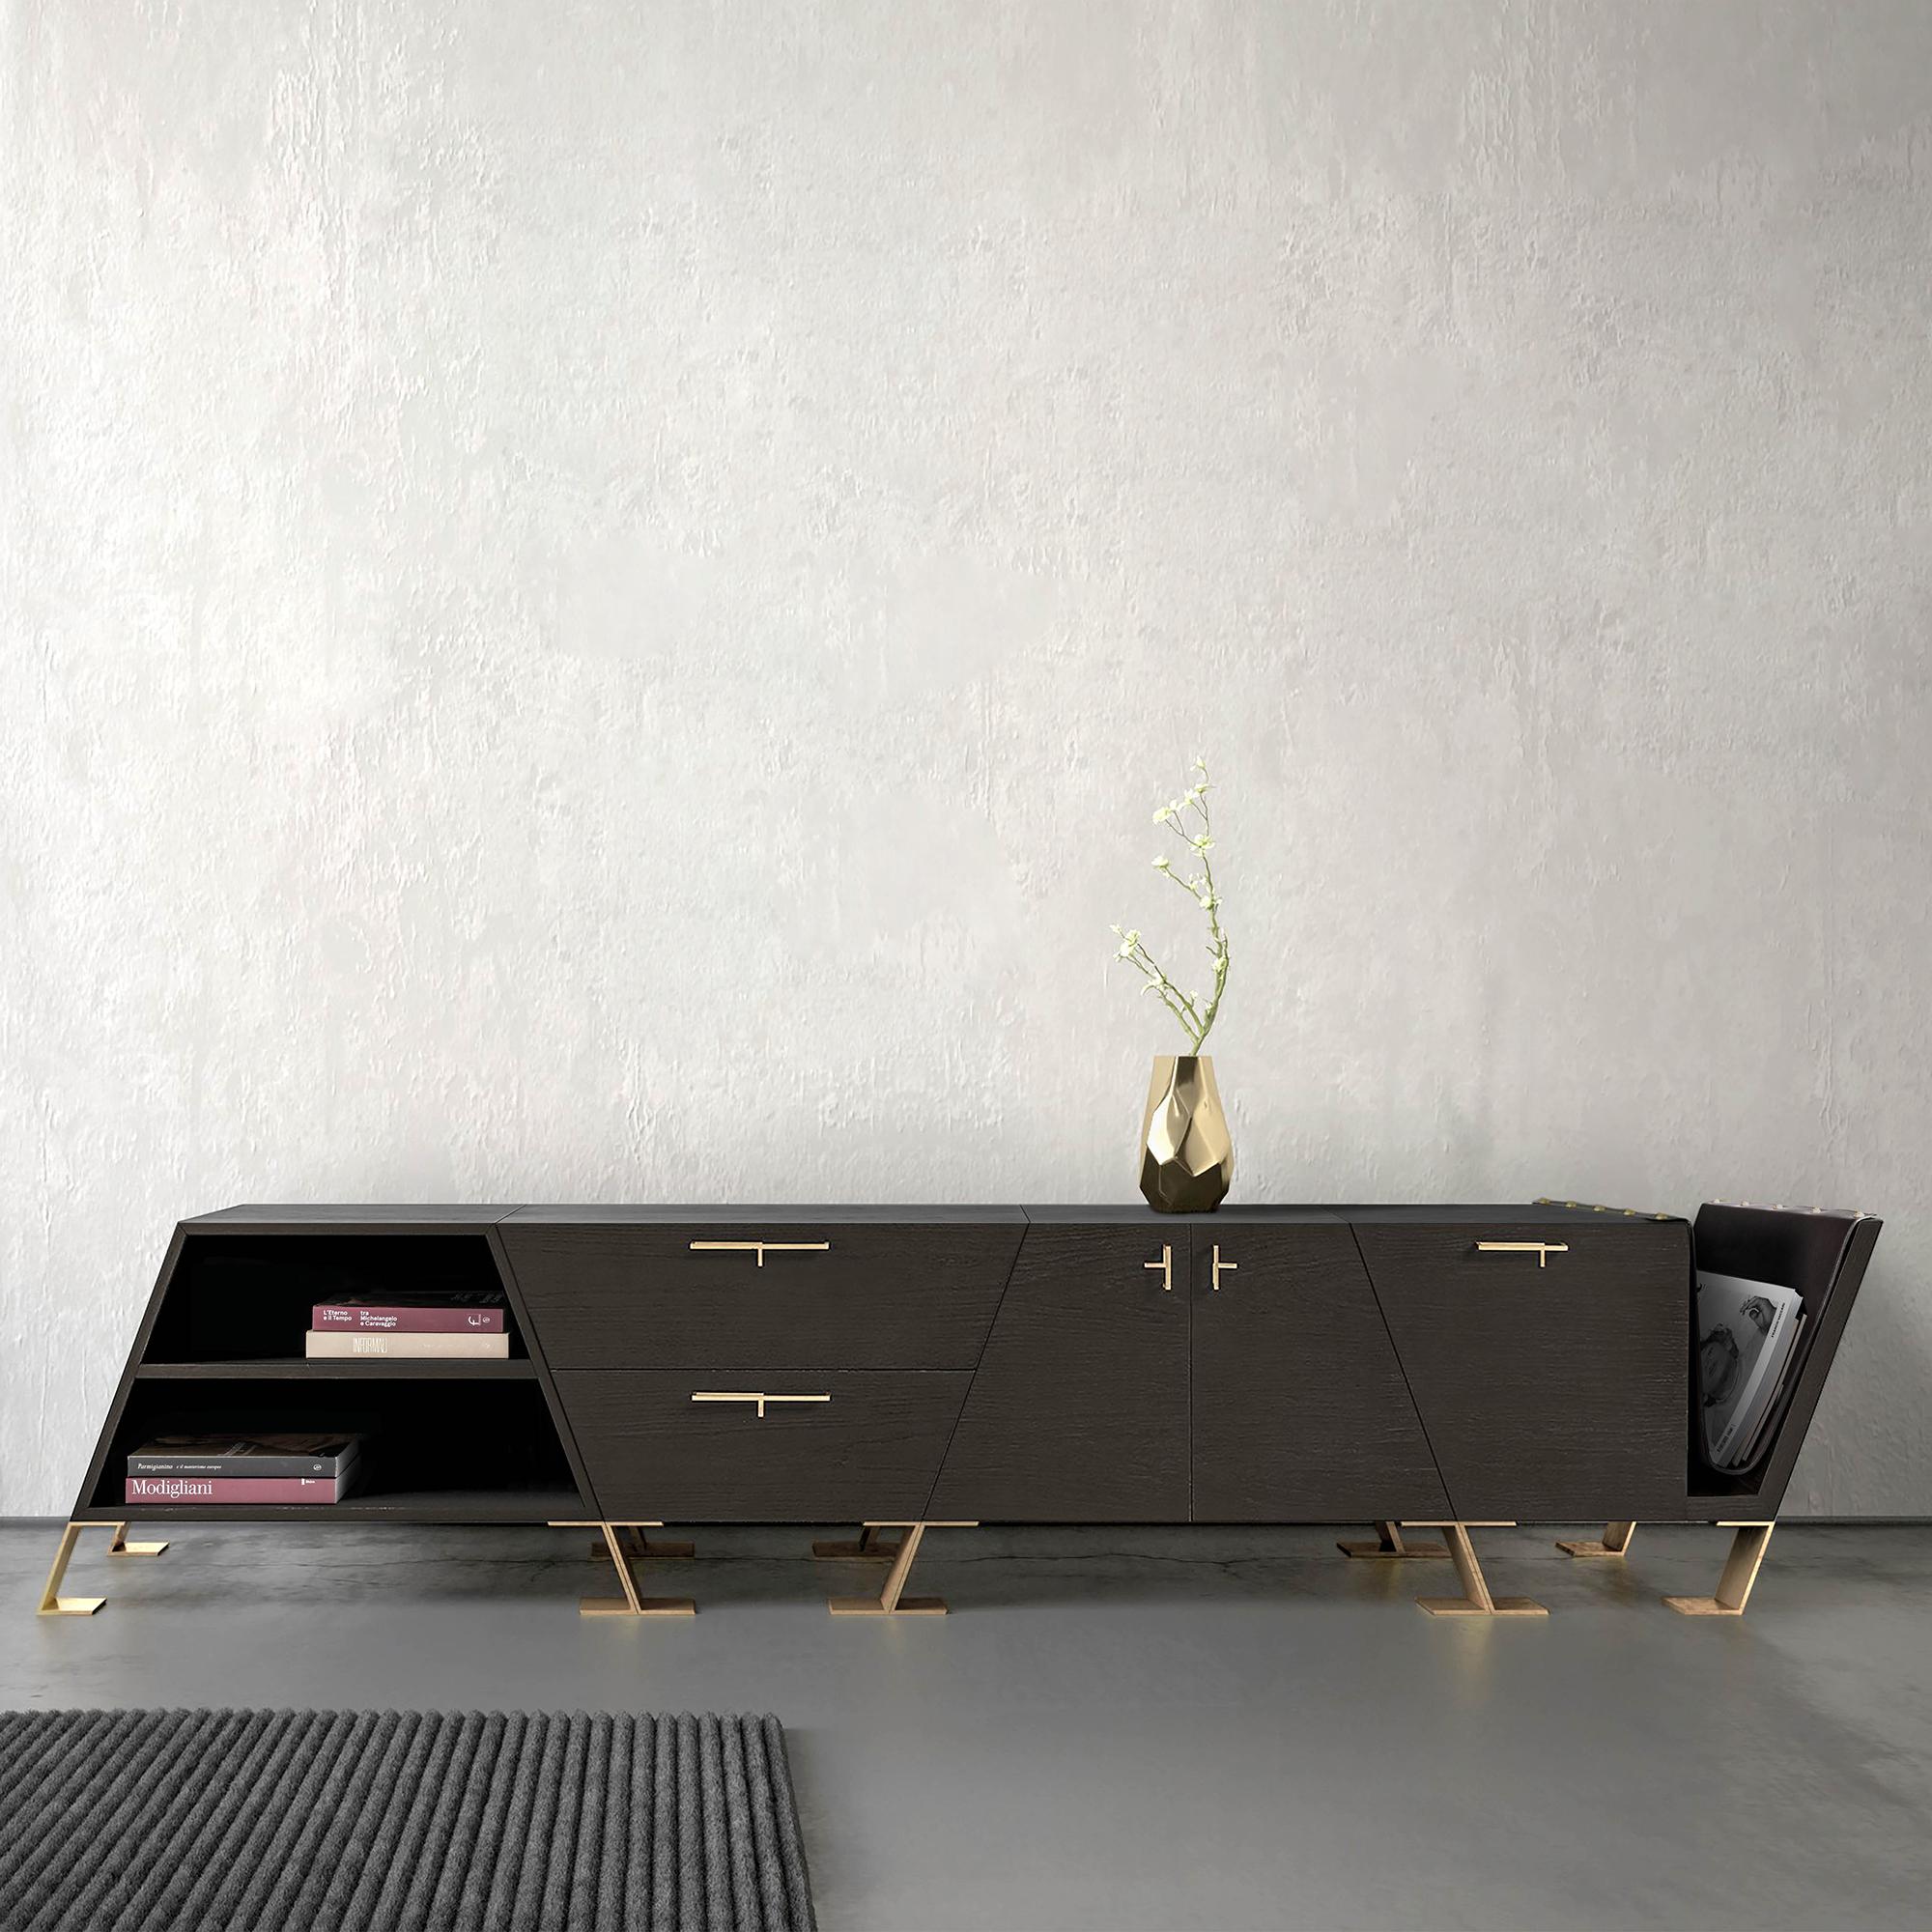 The Fourmosa credenza is an object of splendid craftsmanship without pre-defined measurements. It is composed of four elements, each with its own functionality and aesthetics; the component pieces can exist on their own or be combined at